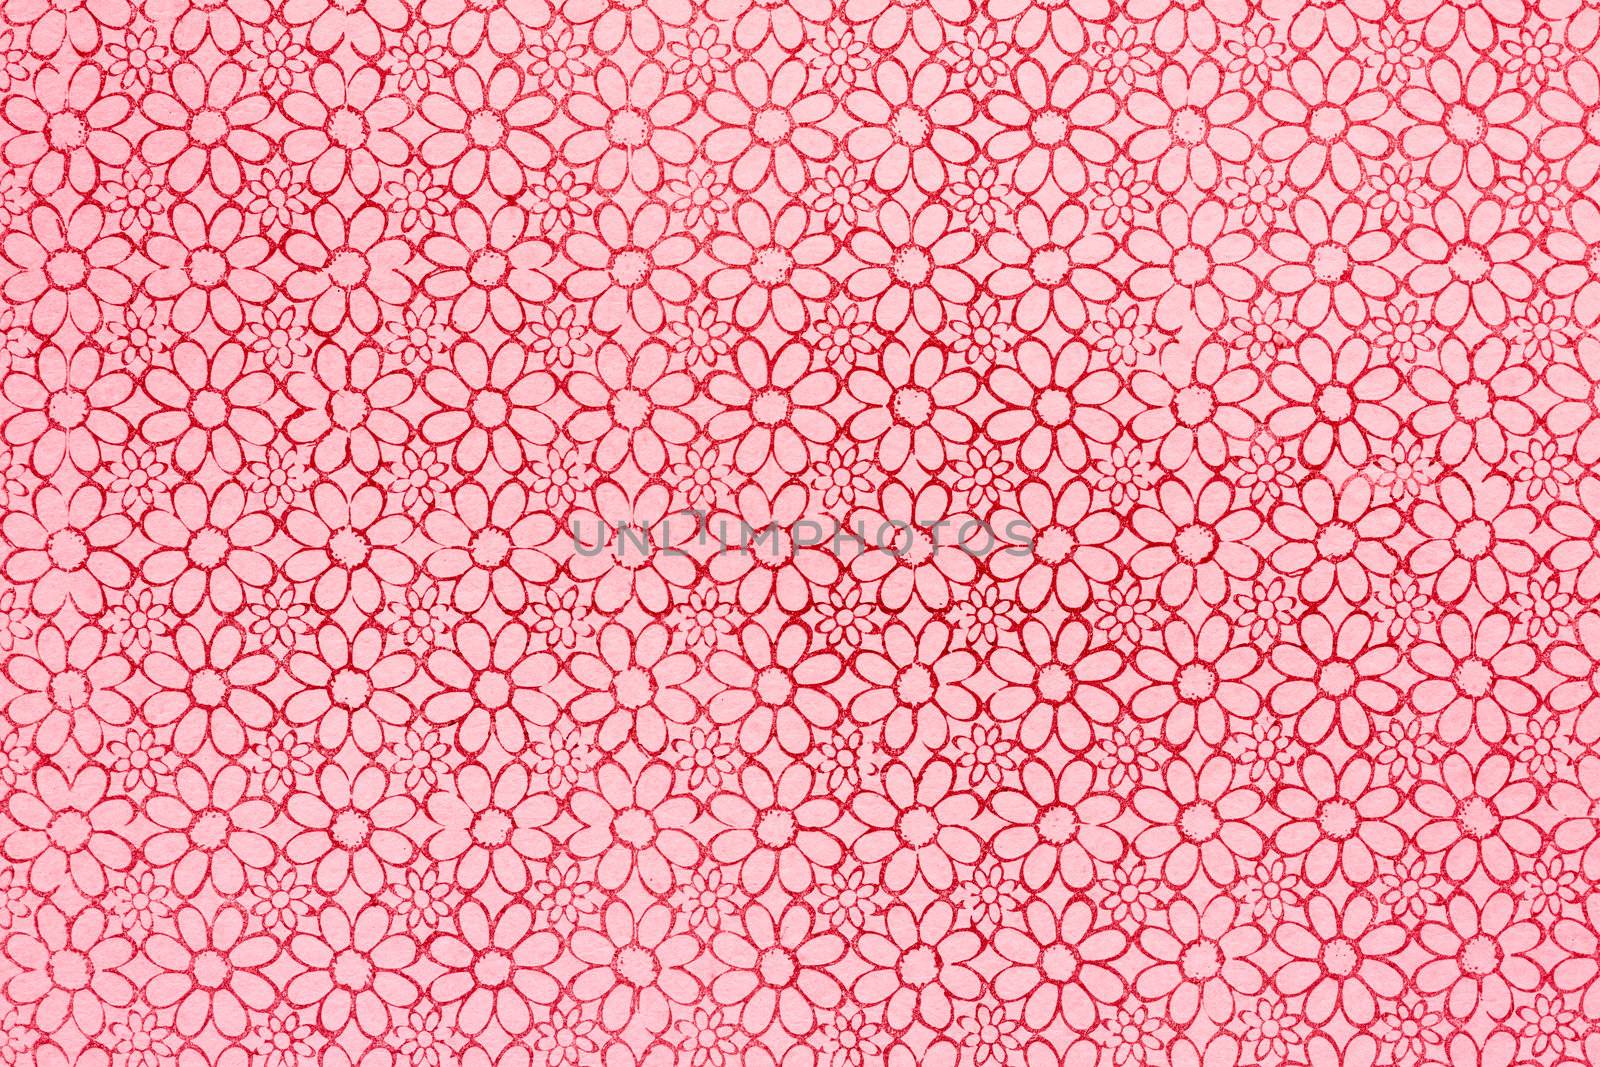 Flower design. Seamless pattern with pink background